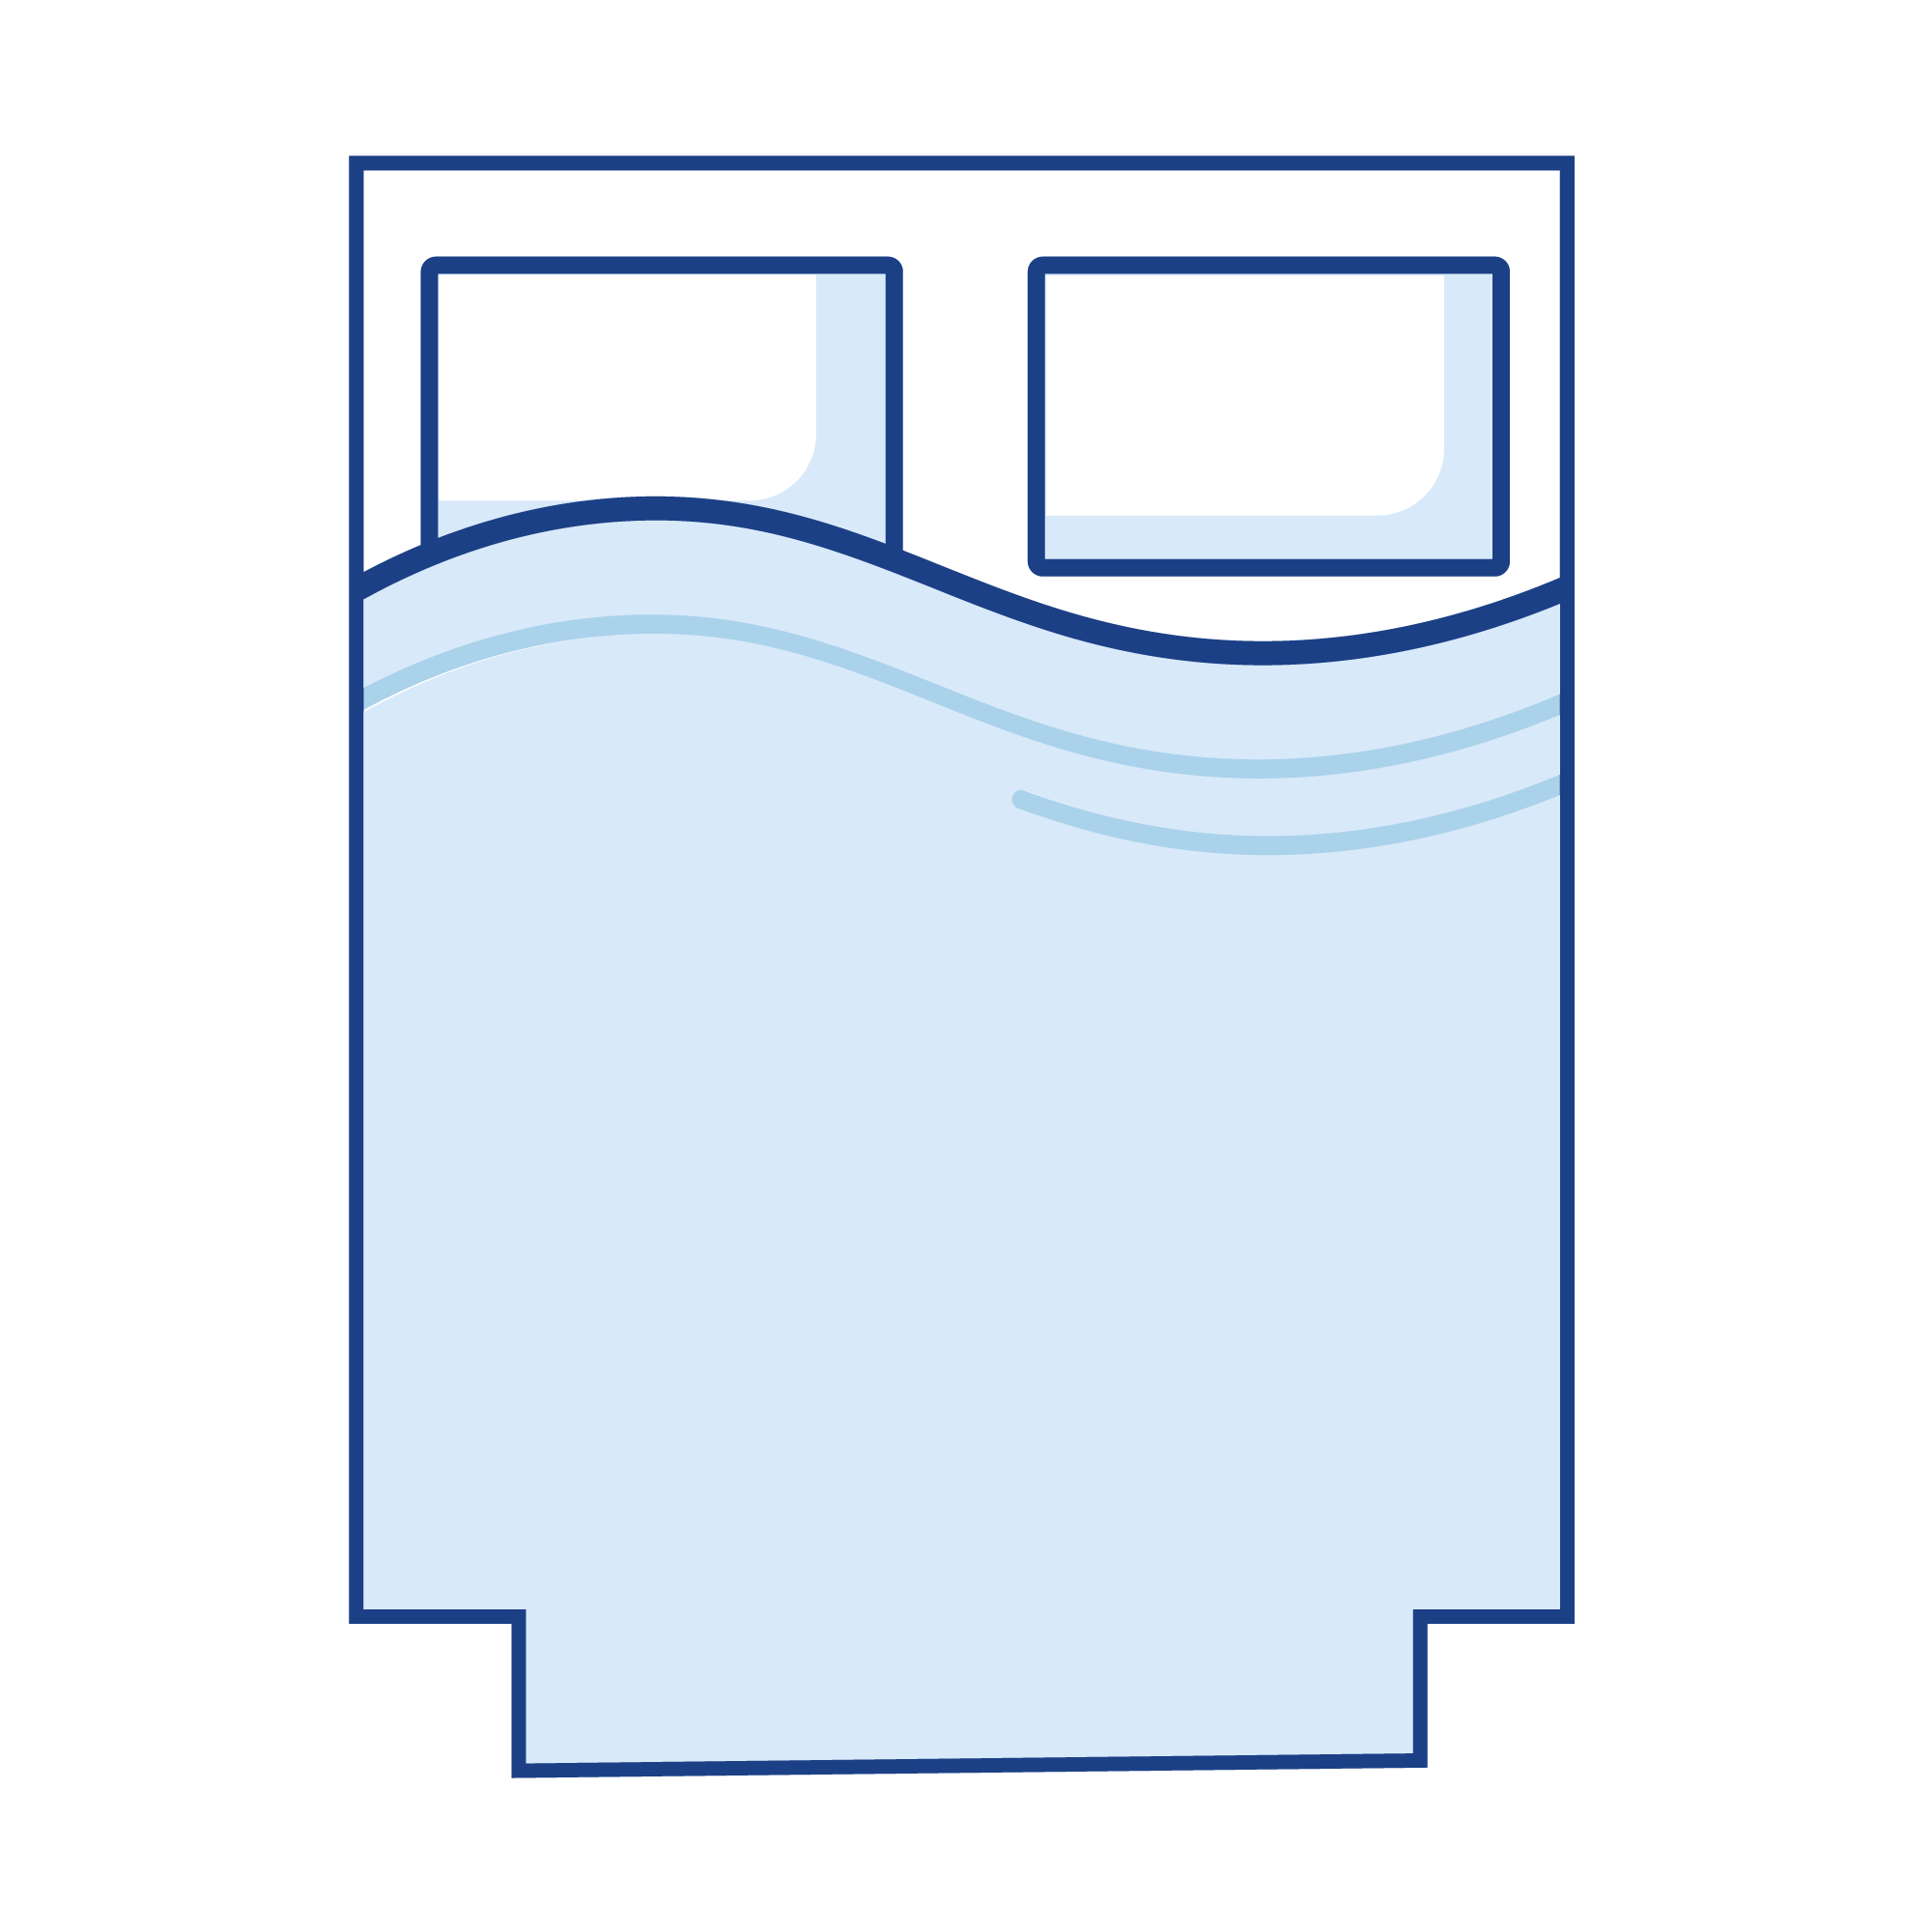 Drawing of a Double-Notched Foot-End Caravan Mattress. Ref: Shape 8